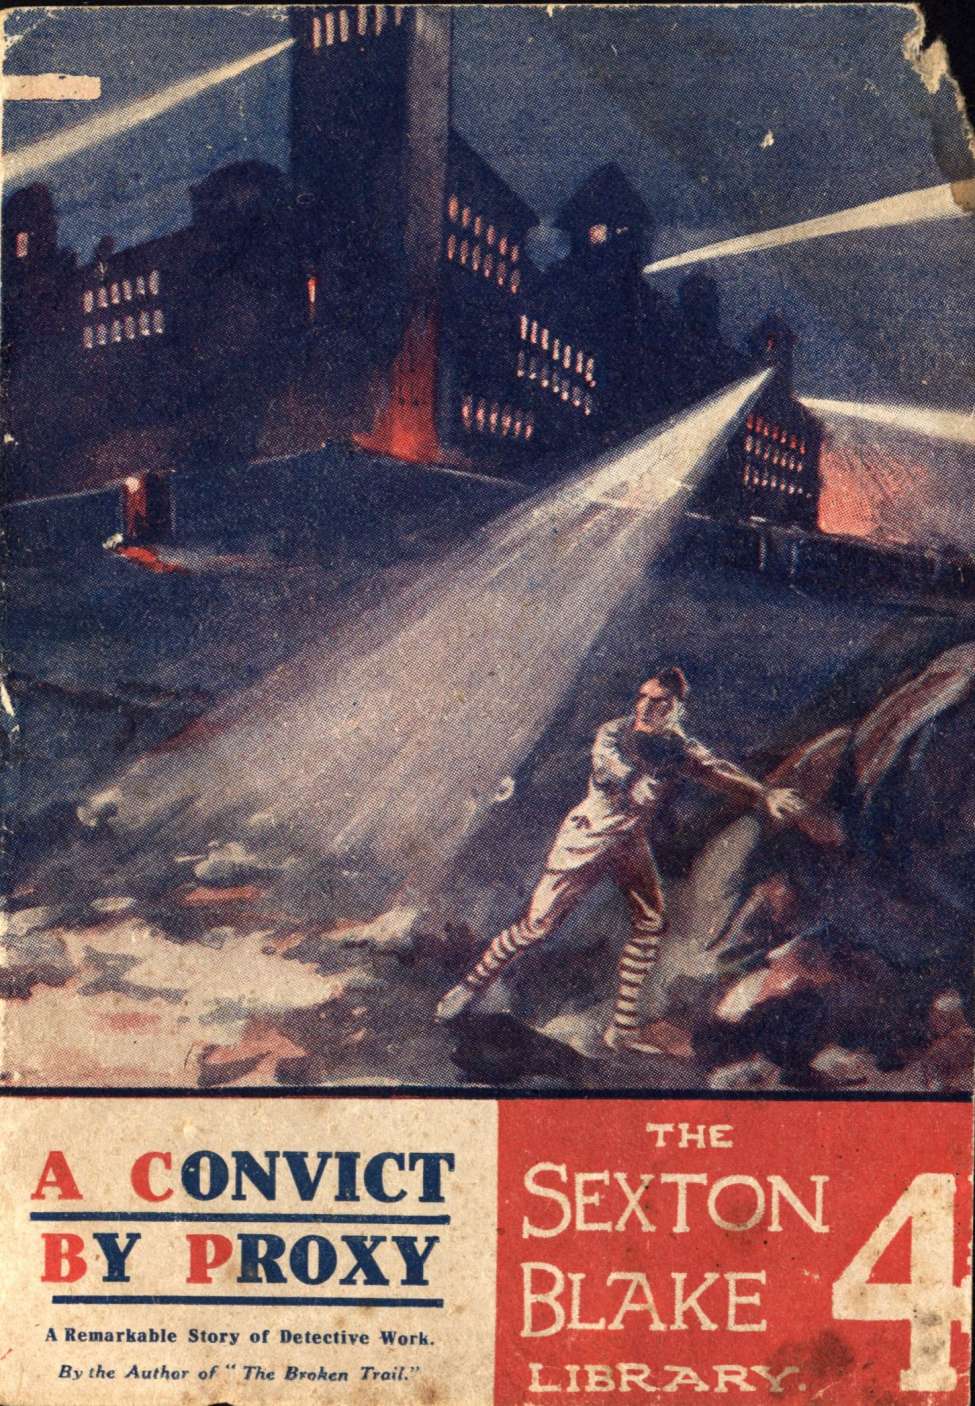 Comic Book Cover For Sexton Blake Library S1 76 - A Convict by Proxy